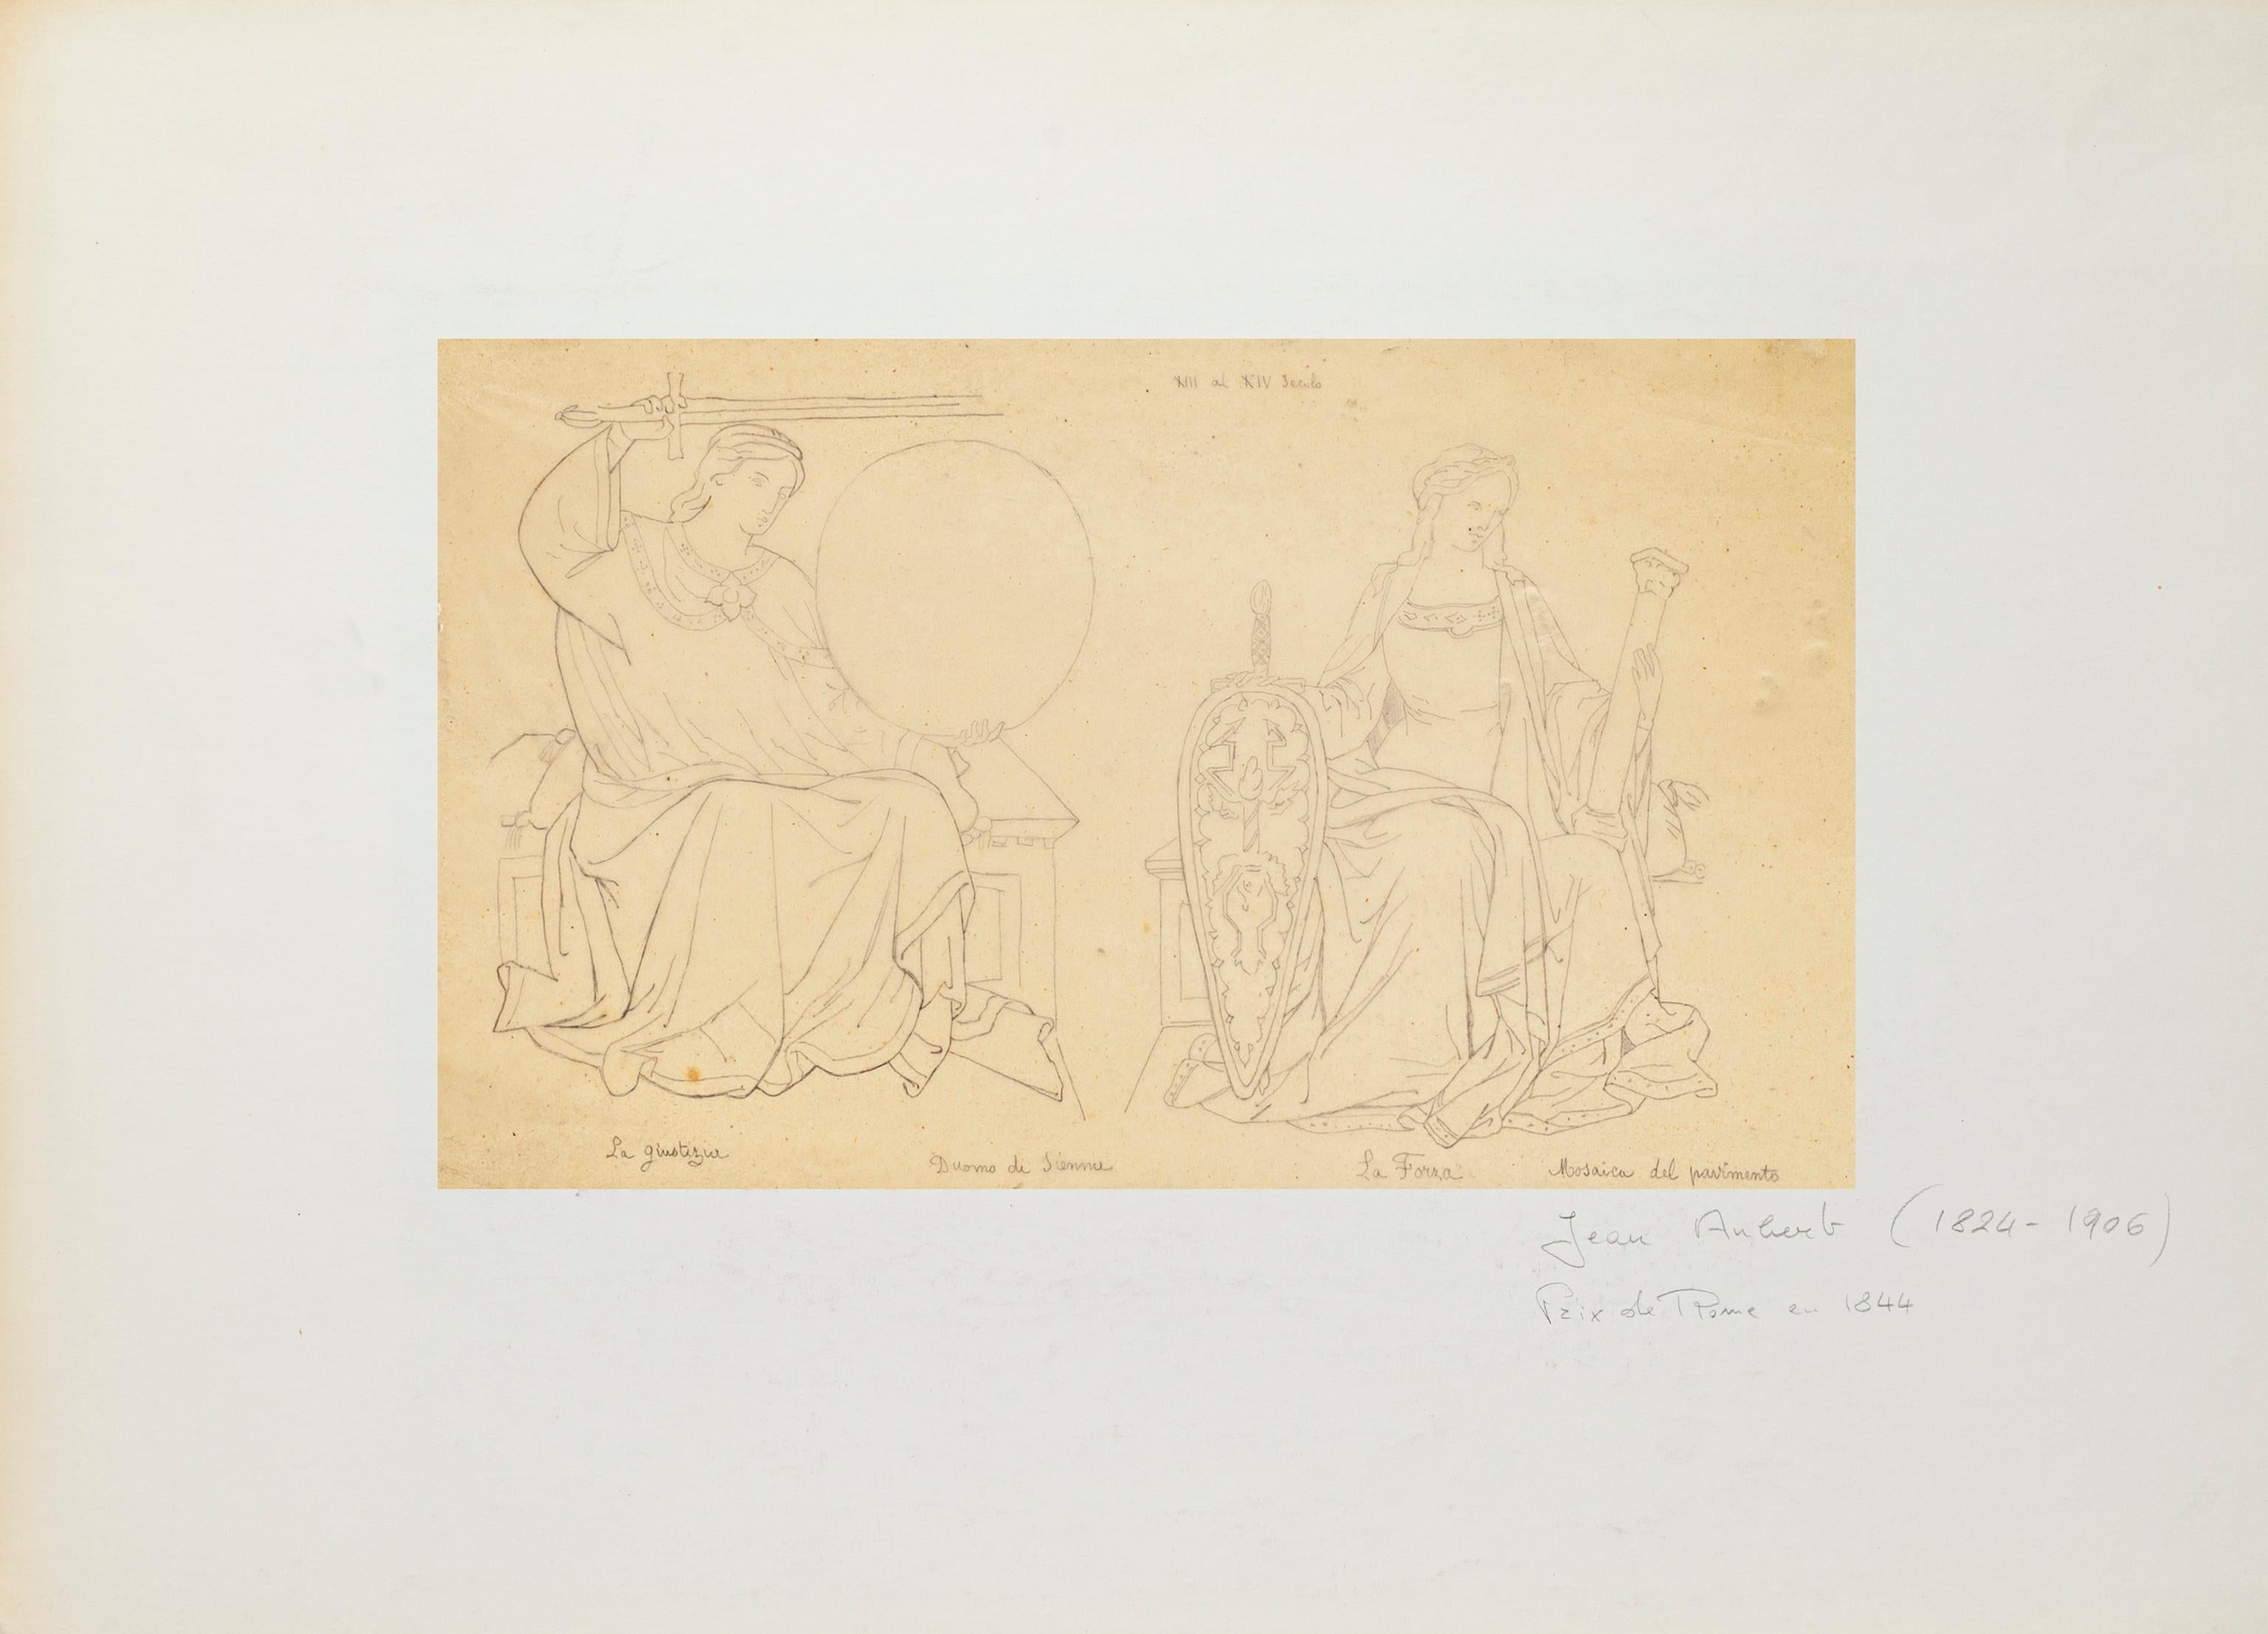 Scene from the Pavement of the Dome in Siena - Pencil Drawing - 1844 - Art by Jean Aubert